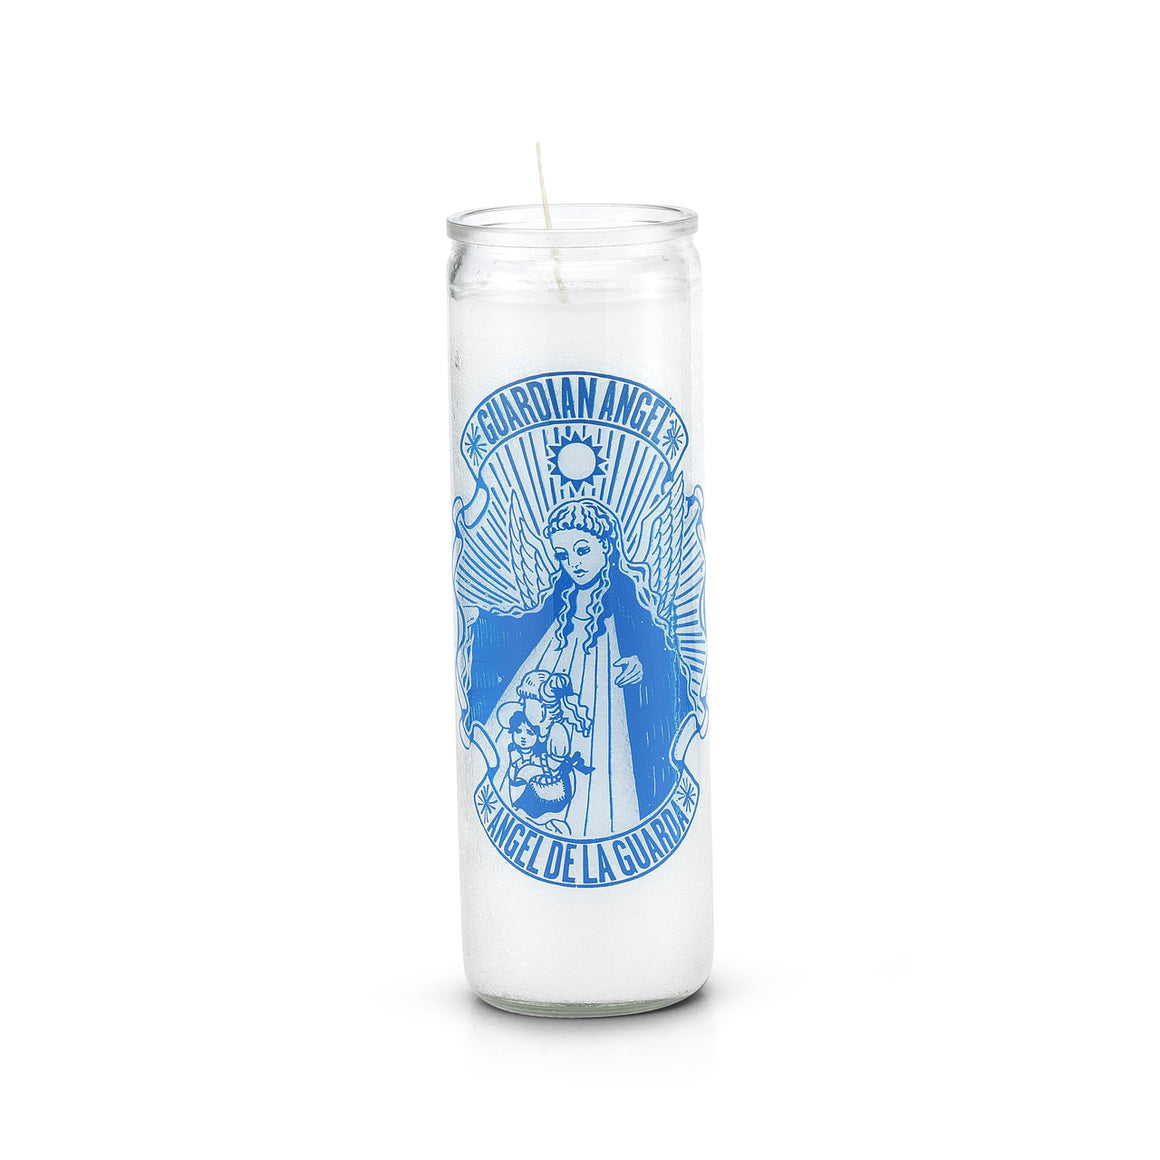 Guardian Angel 7 Day Saint Candle